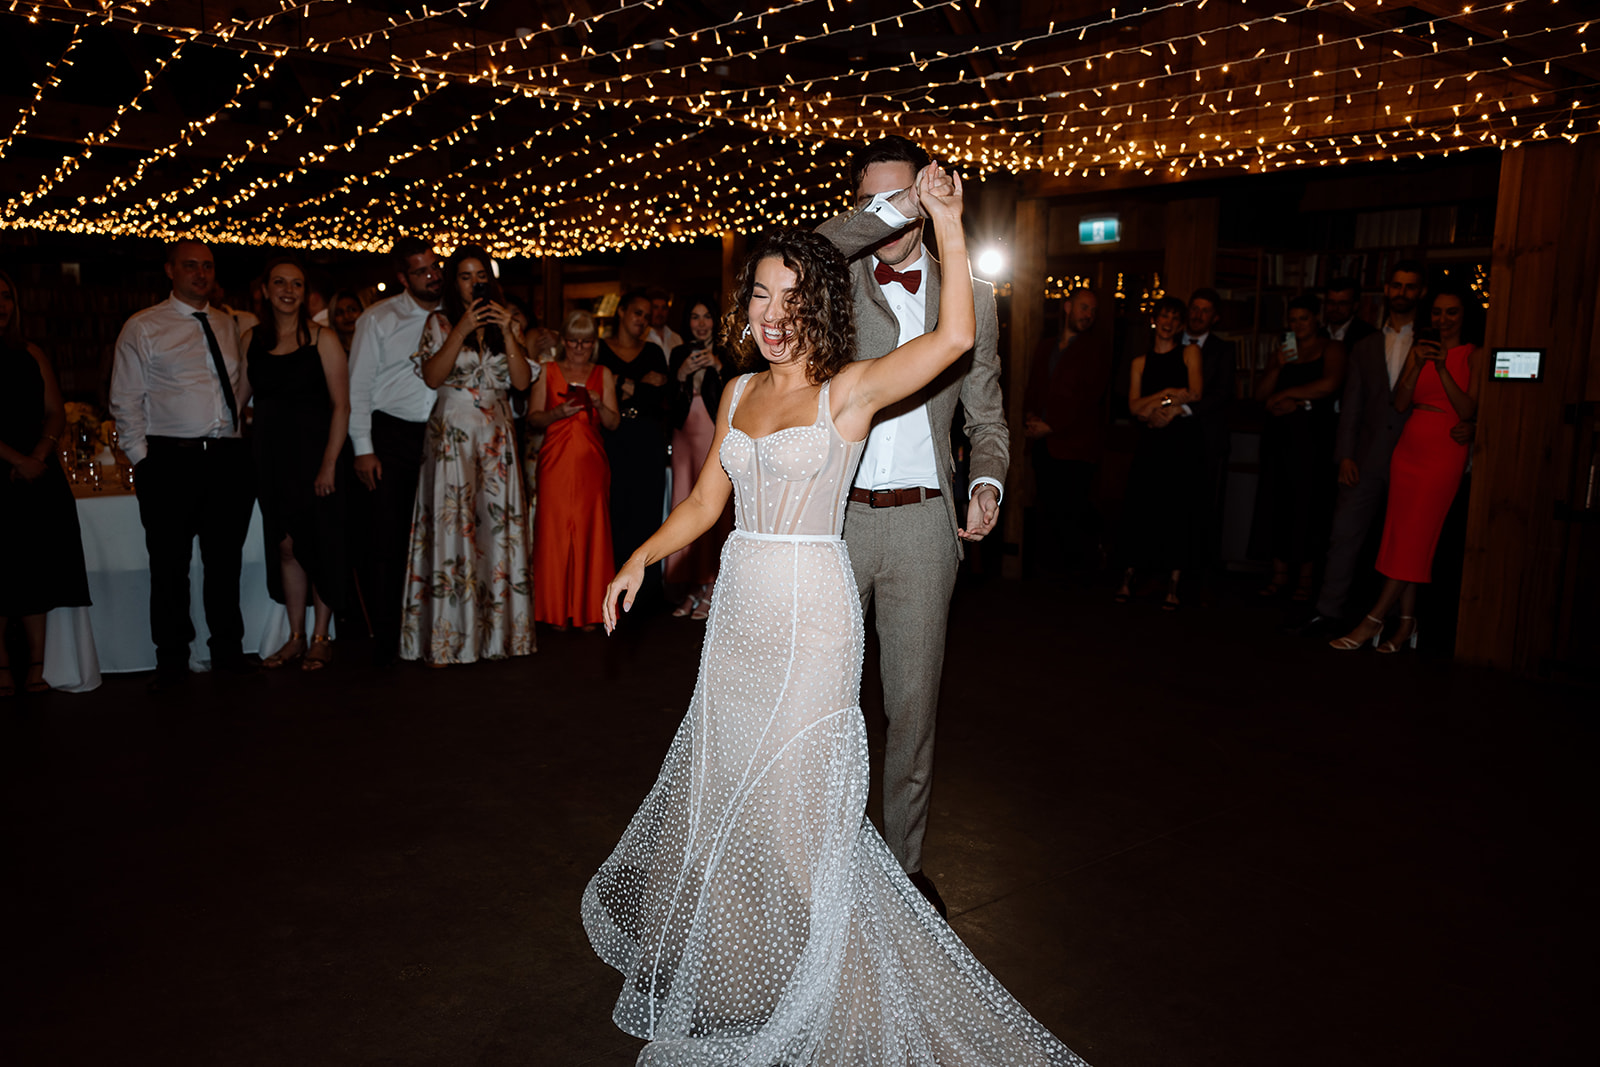 Couple's first dance at the wedding in the Southern Highlands Bendooley Estate